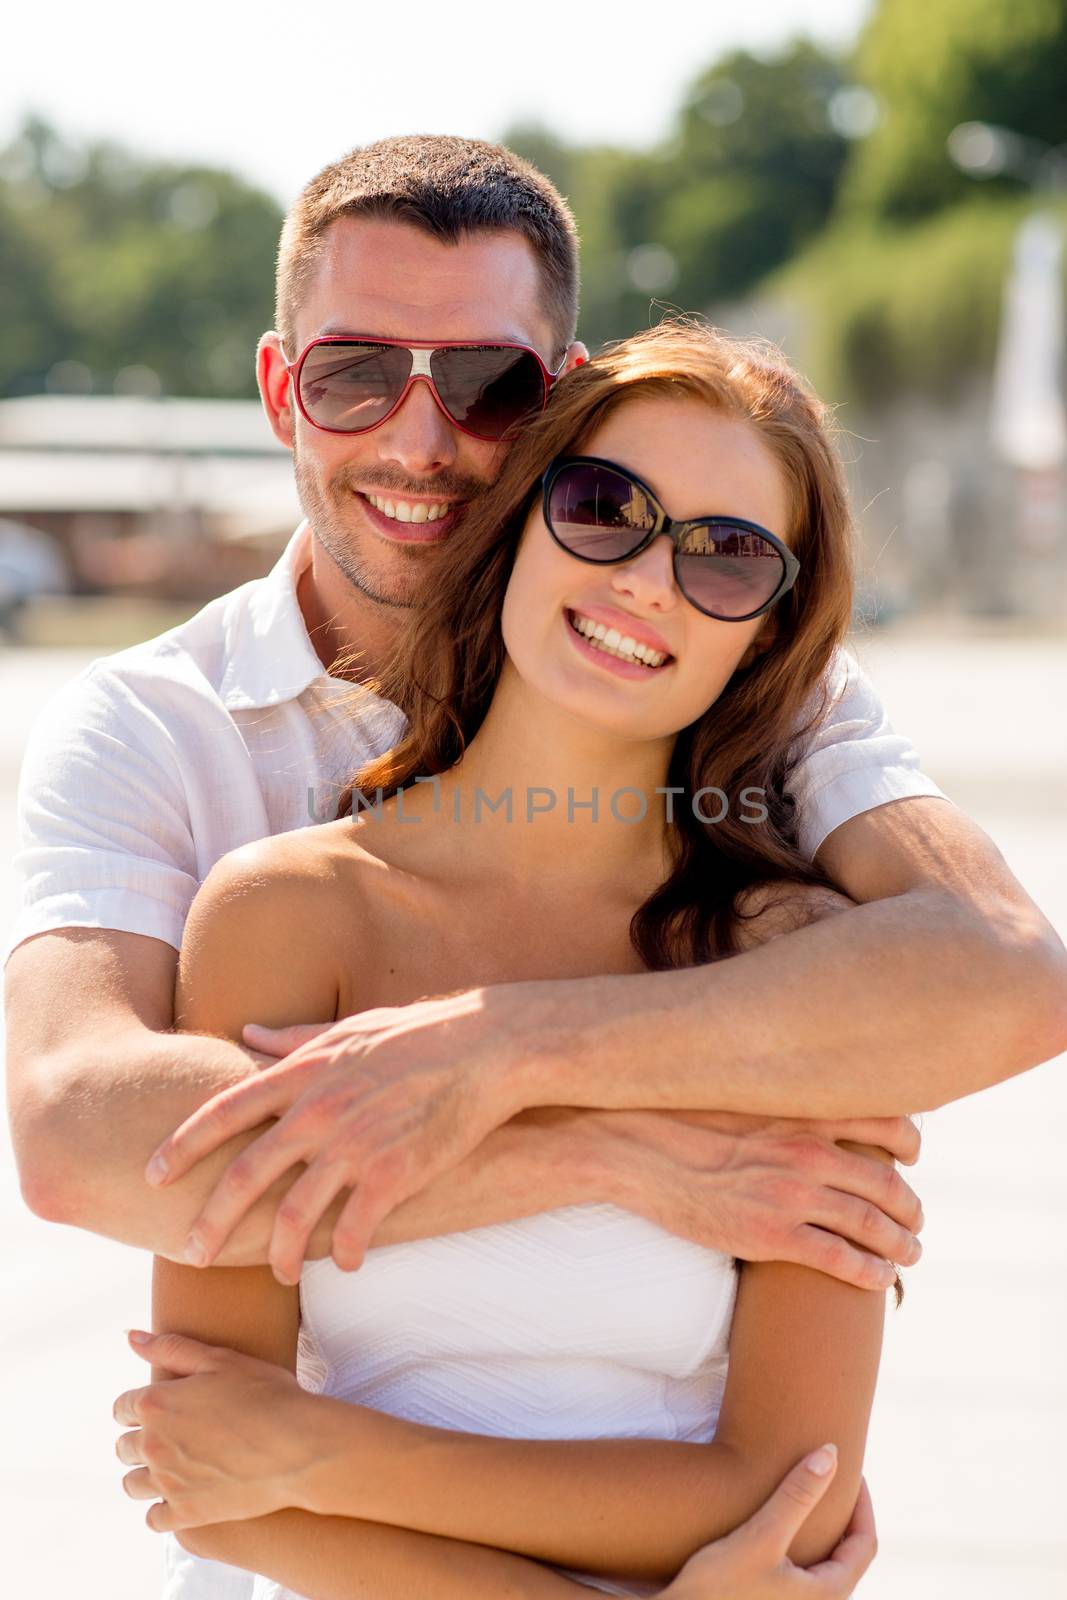 love, wedding, summer, dating and people concept - smiling couple wearing sunglasses hugging in park